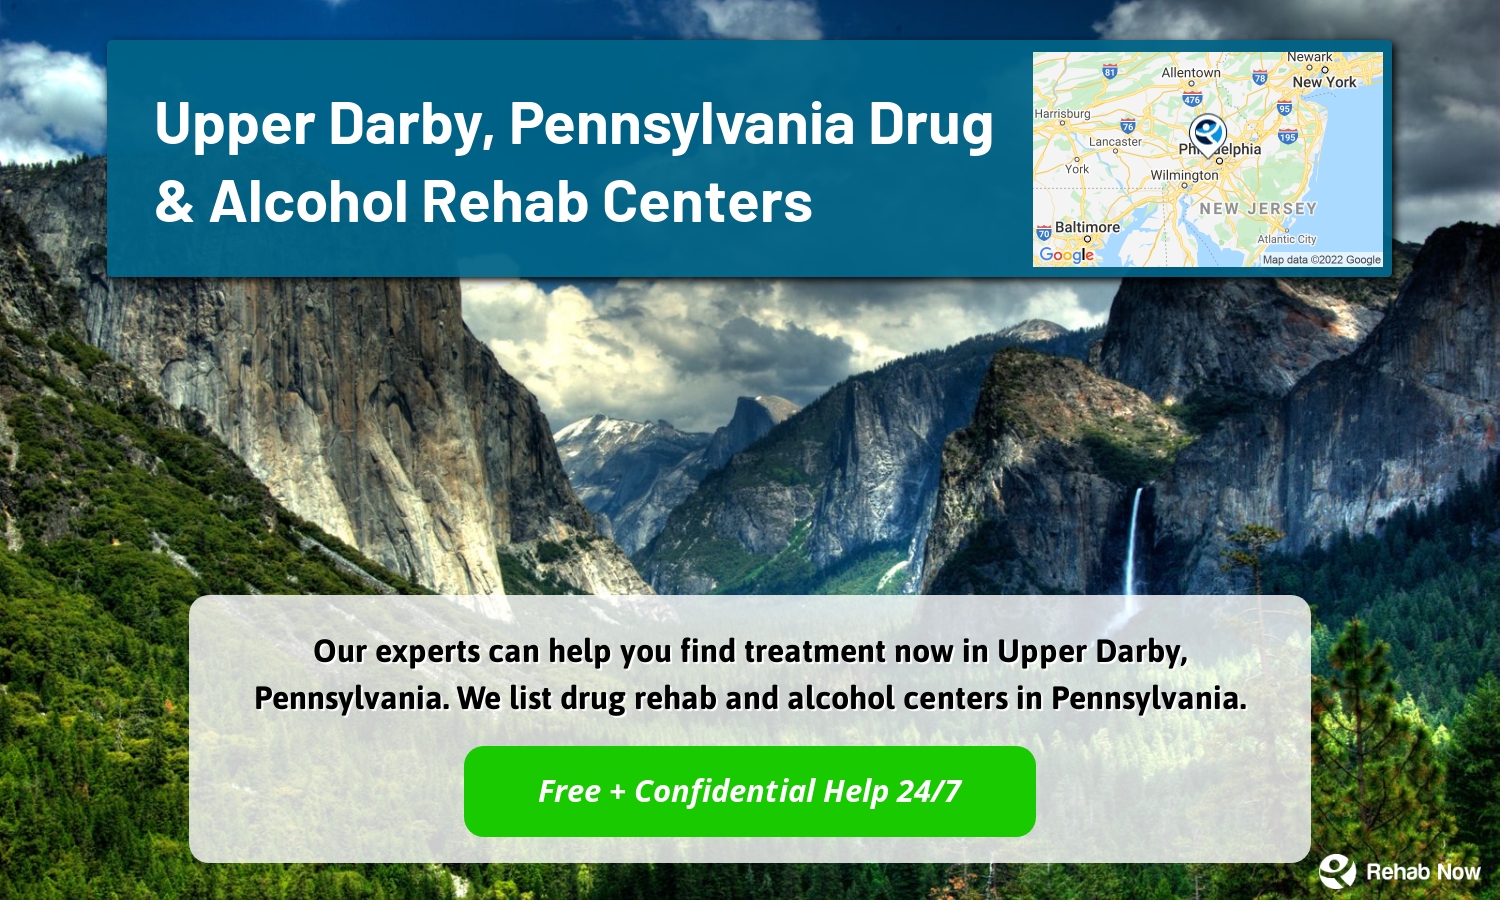 Our experts can help you find treatment now in Upper Darby, Pennsylvania. We list drug rehab and alcohol centers in Pennsylvania.